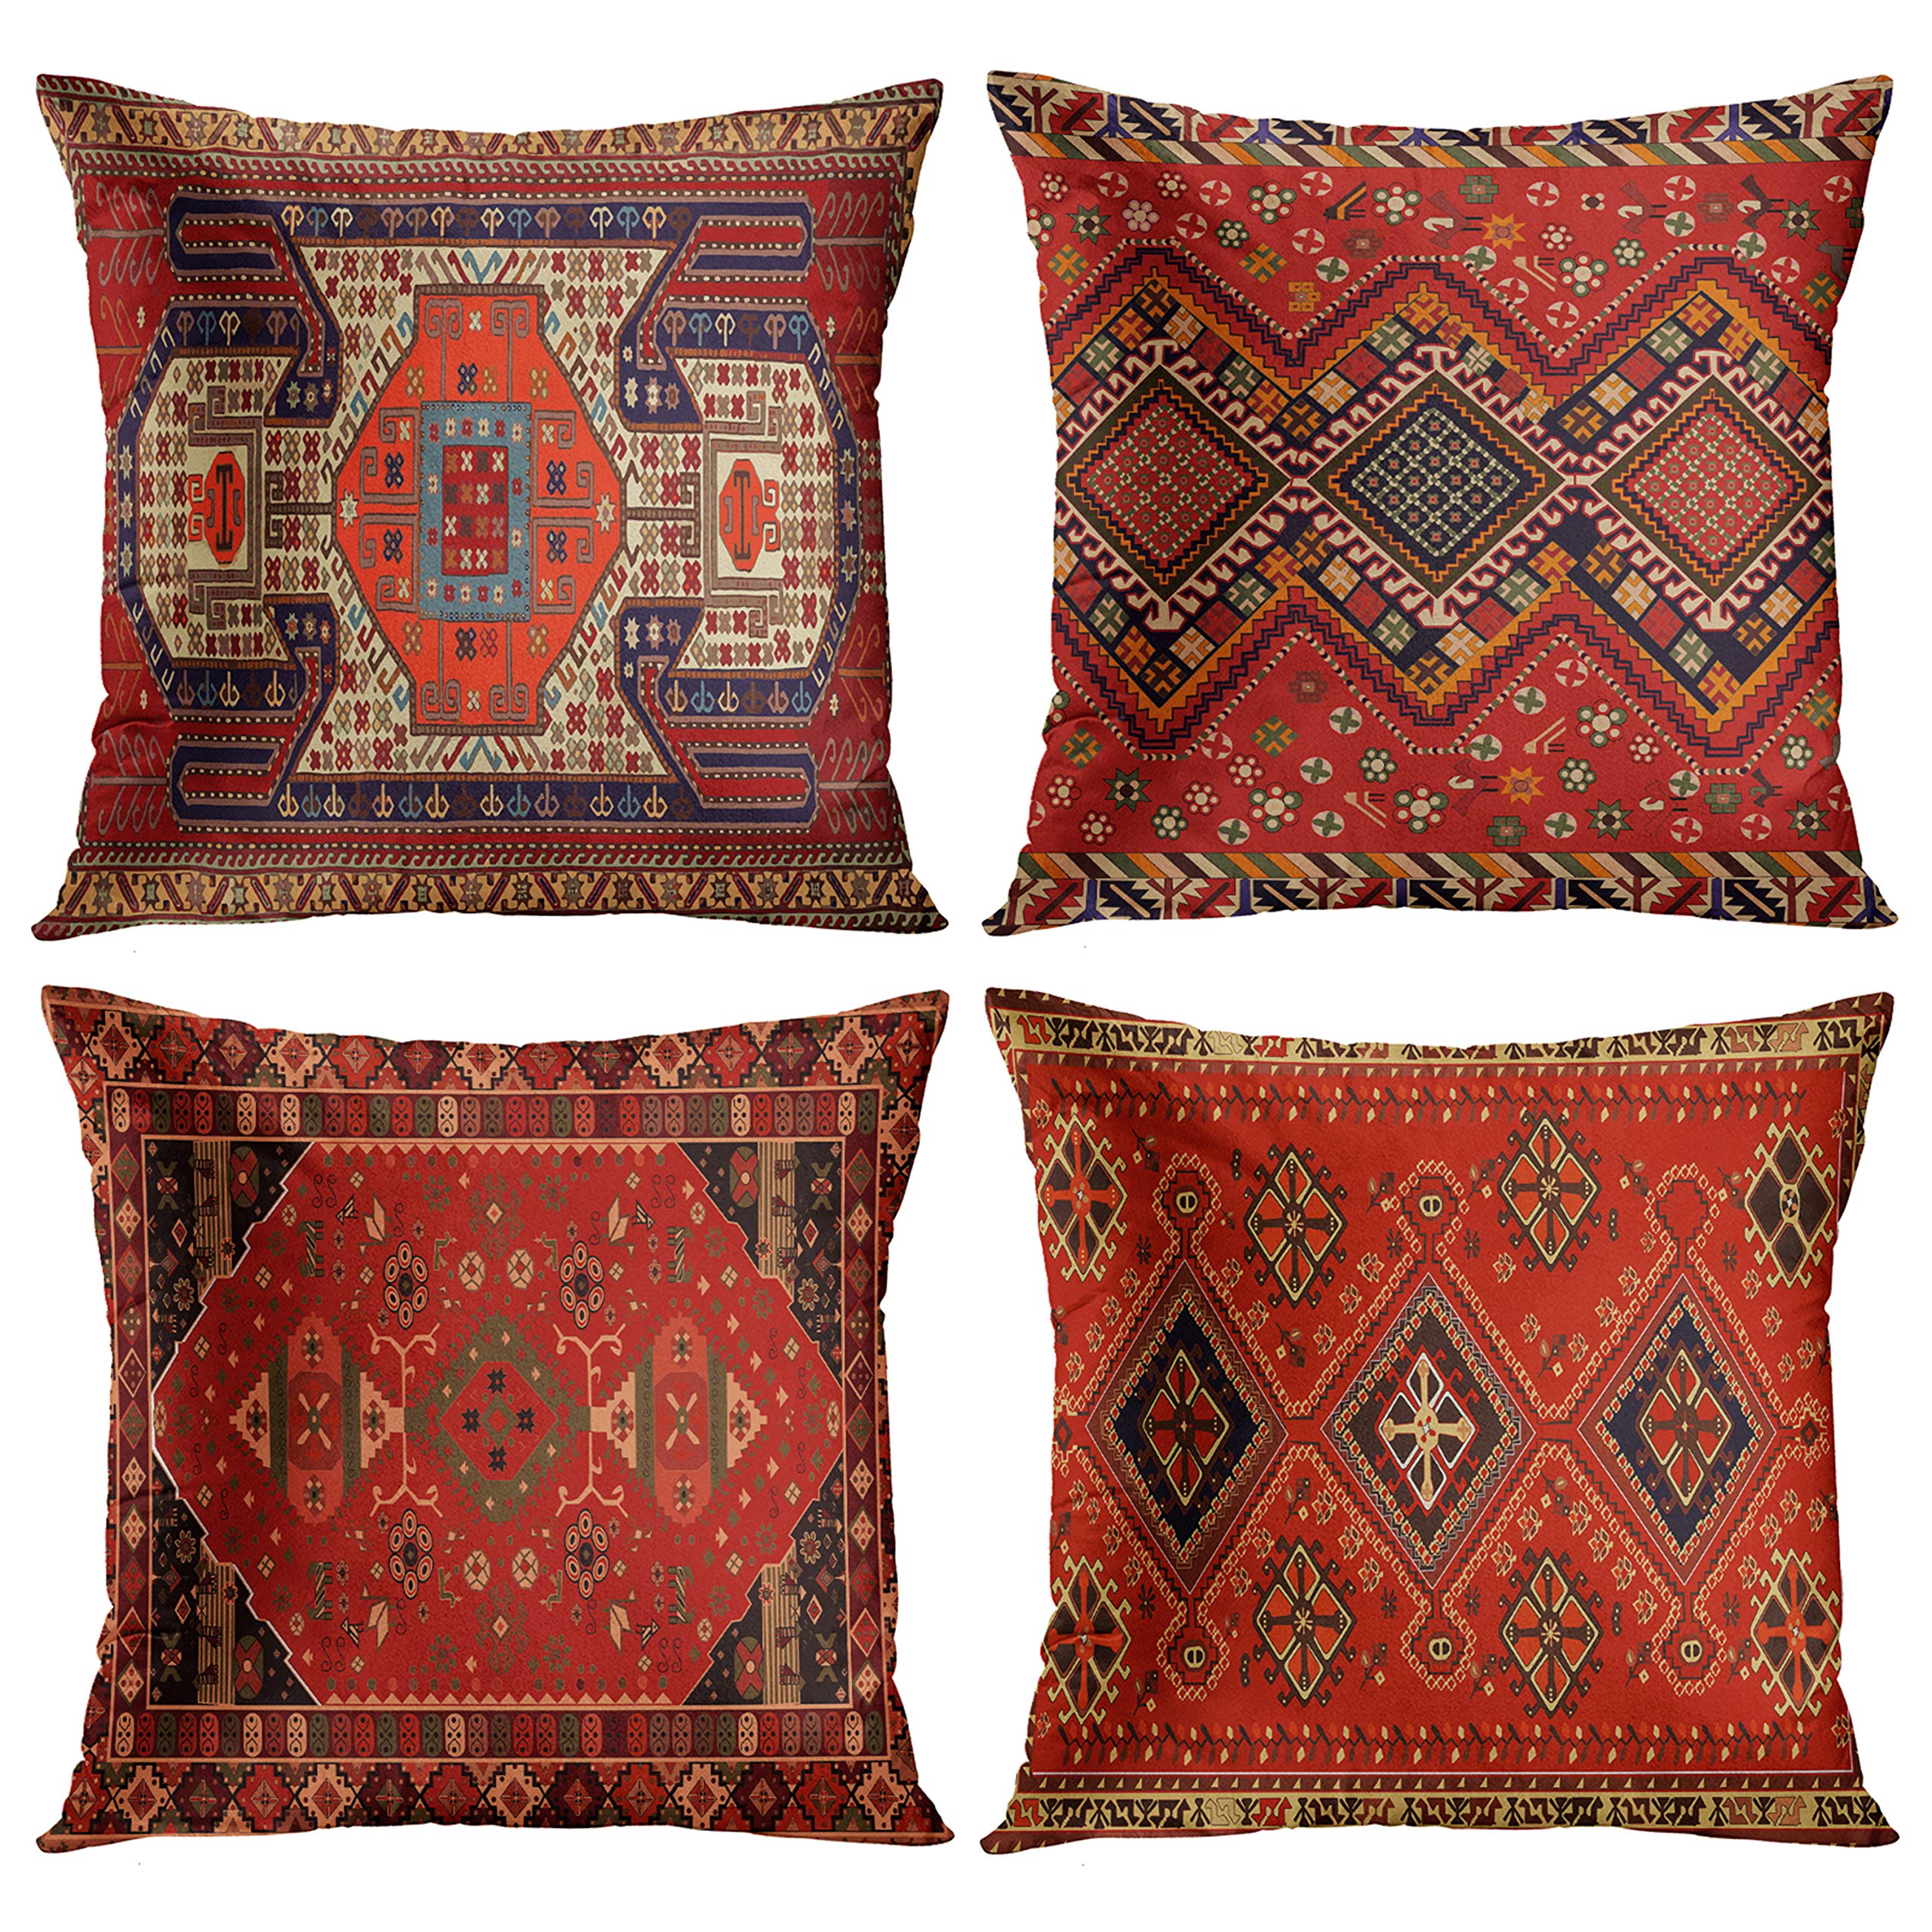 Emvency Set of 4 Throw Pillow Covers Tribal Abstract Bright Red and Yellow Vintage Persian Carpet Pattern Decorative Pillow Cases Home Decor Standard Square 18x18 Inches Floral Pillowcases